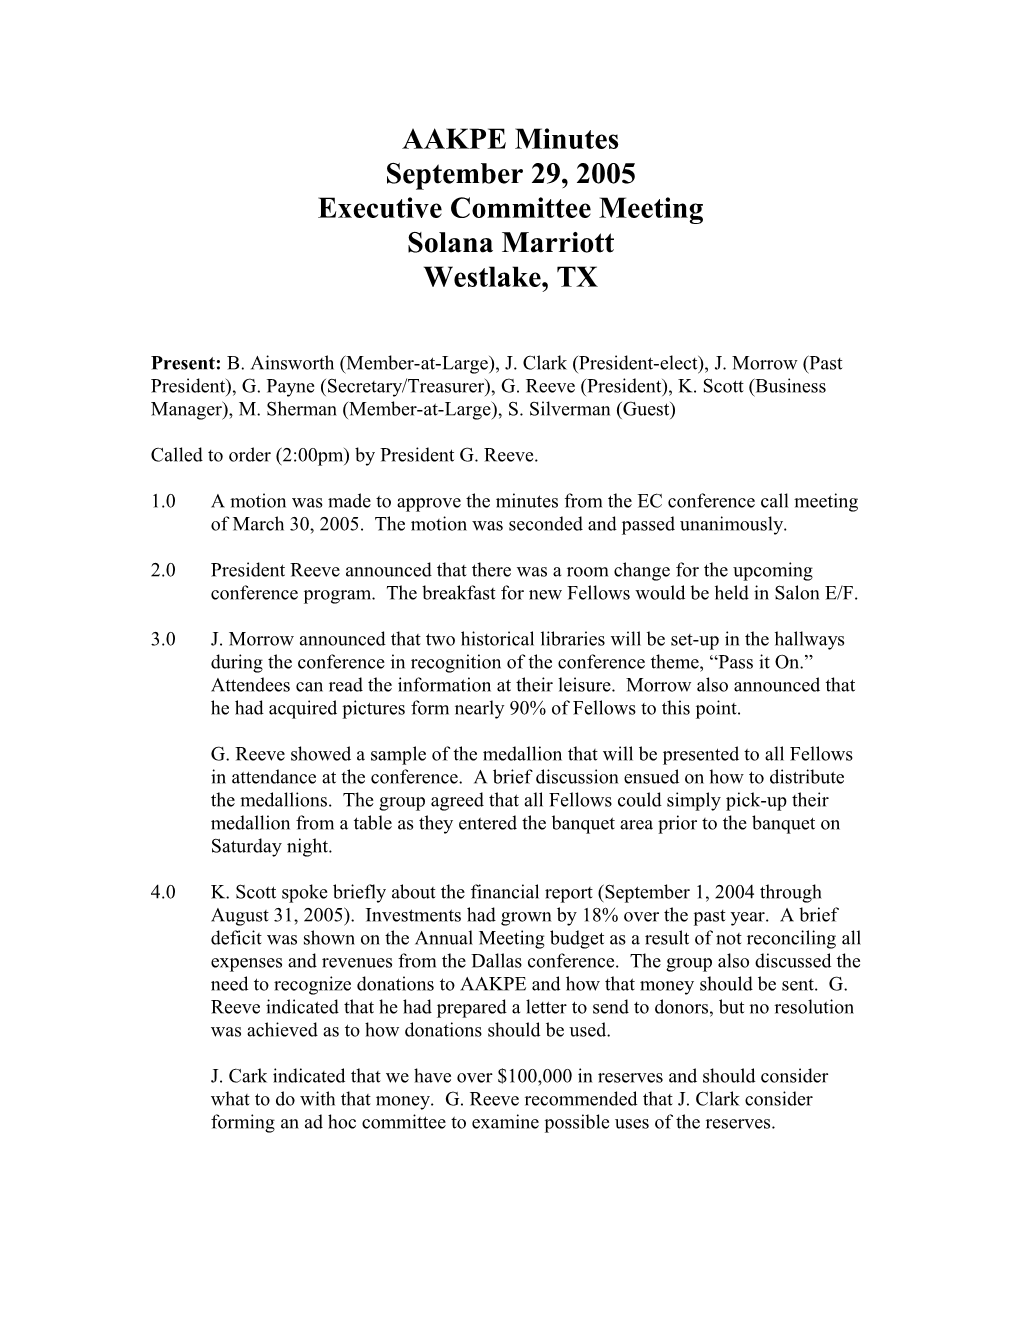 Executive Committee Meeting s5